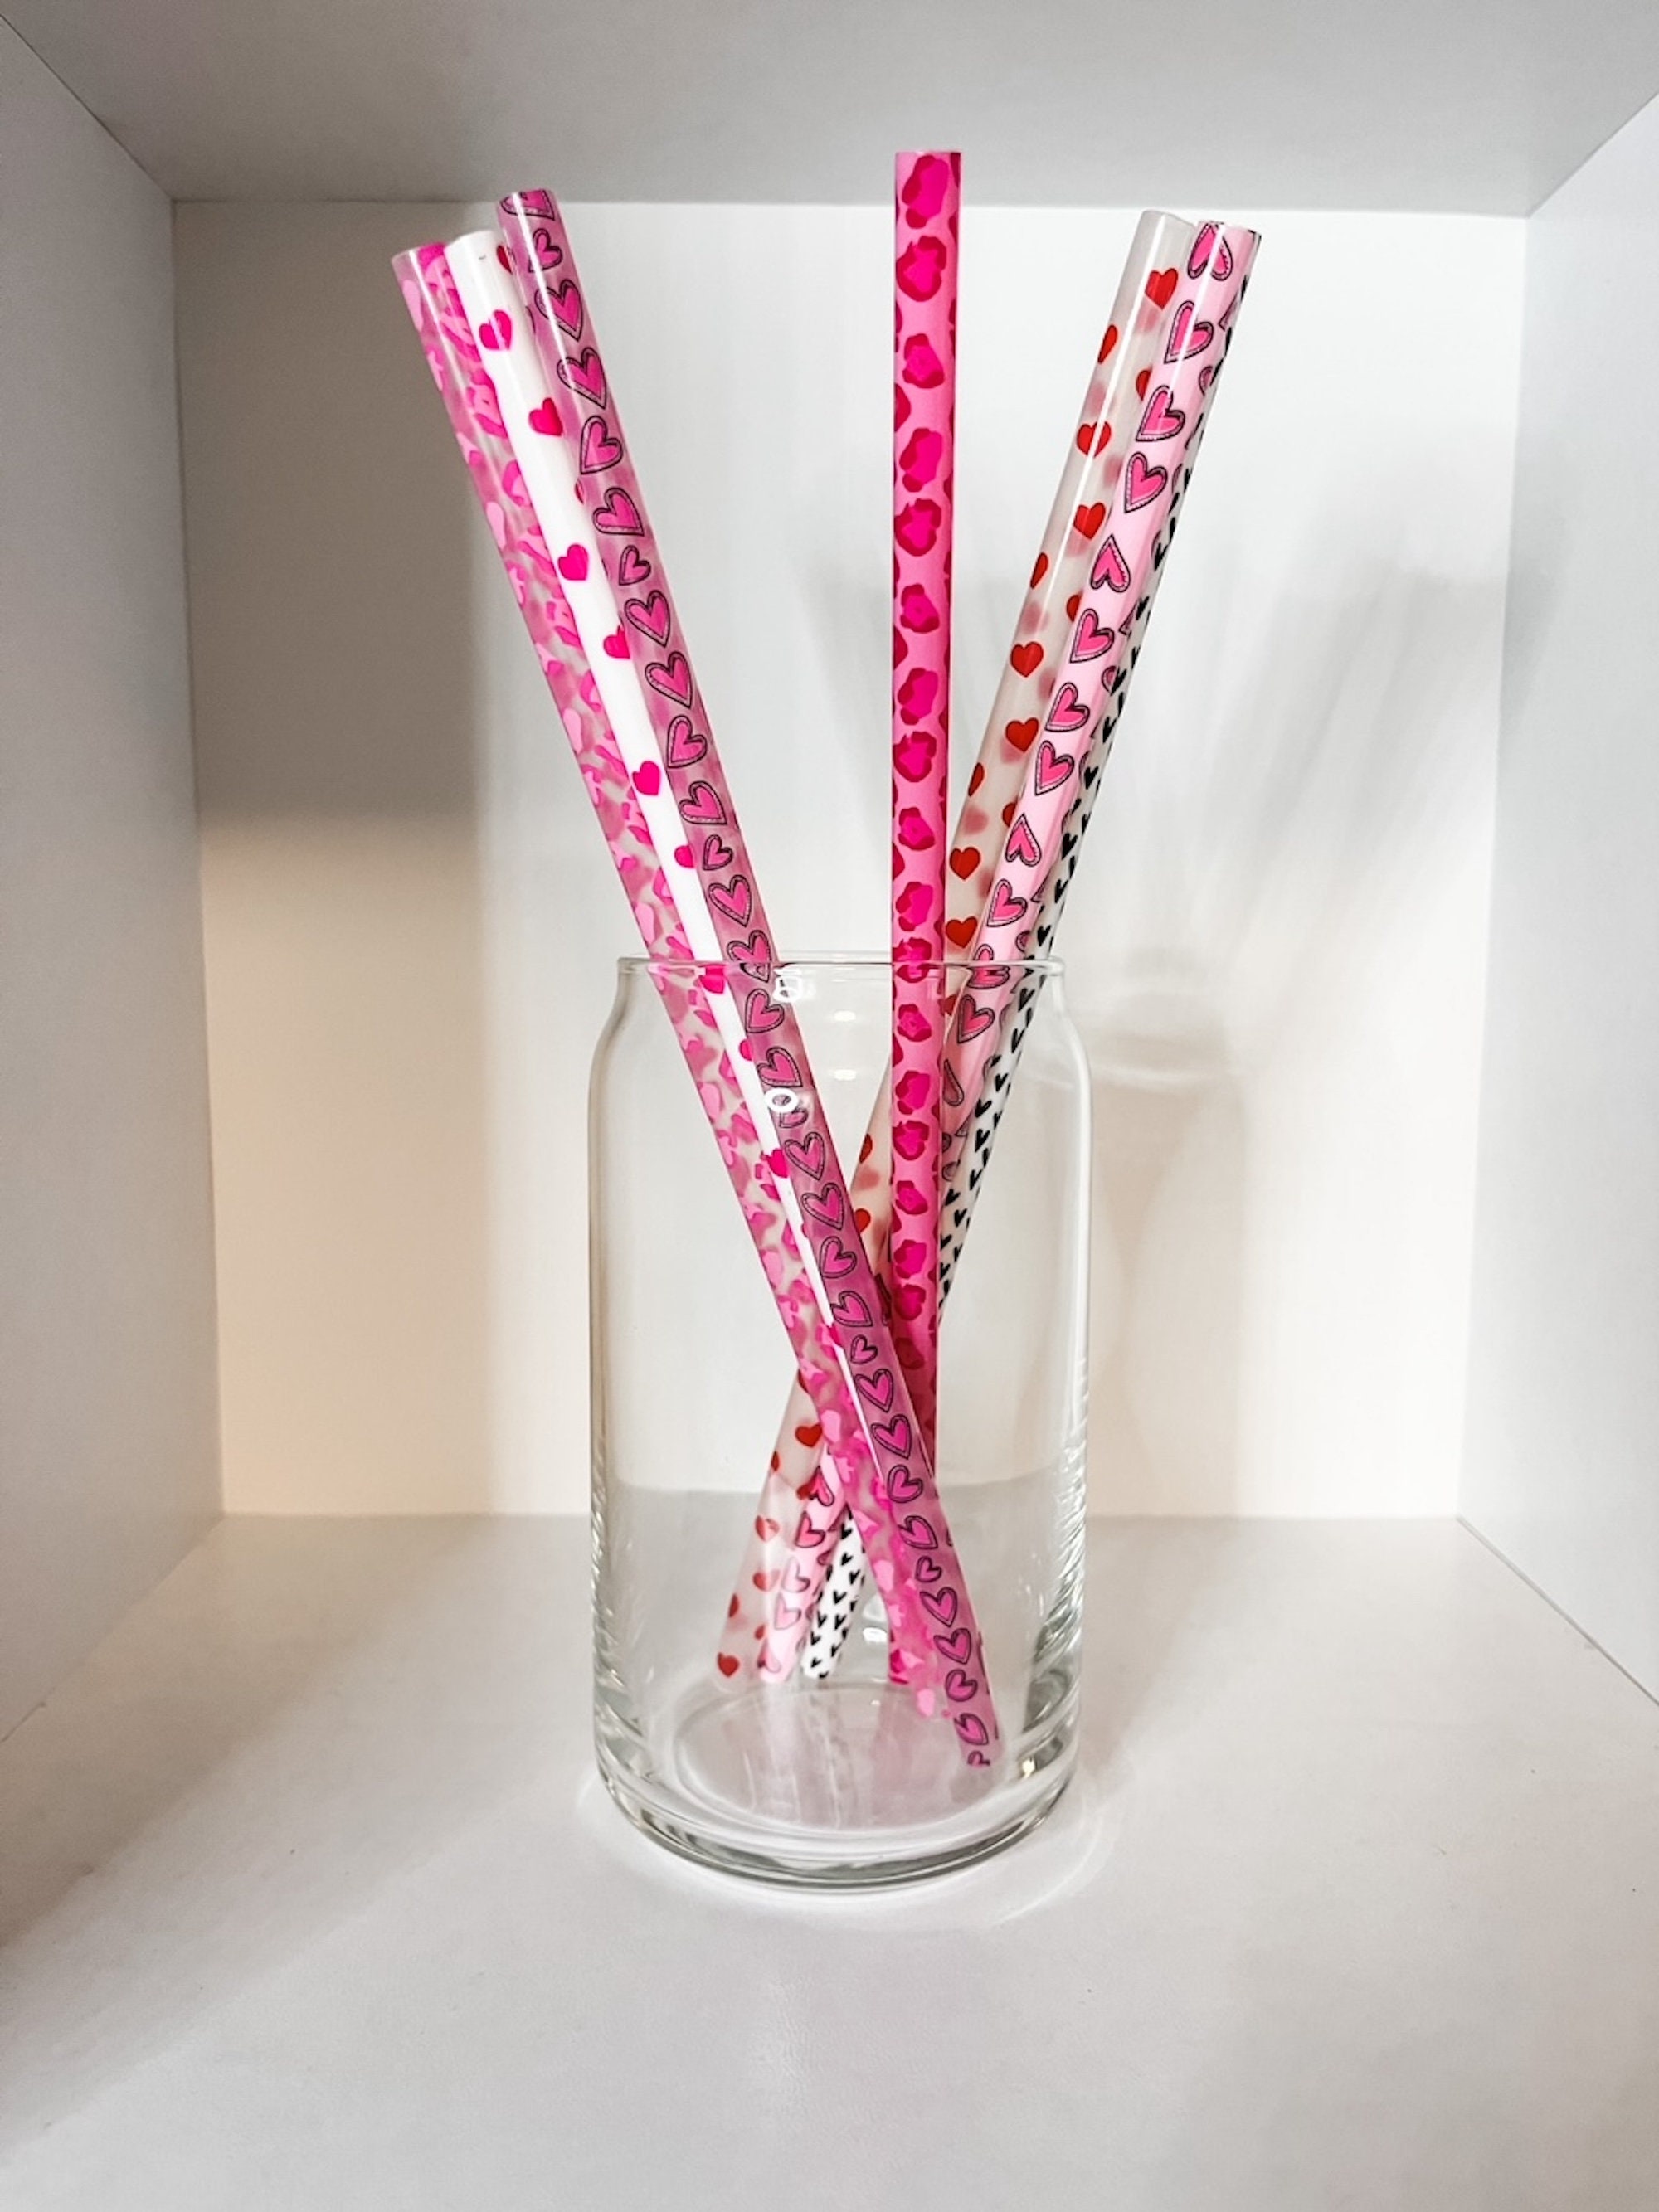  24 Pieces Valentine's Day Heart Shaped Straws Reusable Crazy  Loop Straws Valentine Theme Party Plastic Drinking Straws for Valentine's  Day Birthday Wedding Party Favors Decorations Supplies, 6 Styles : Health &  Household